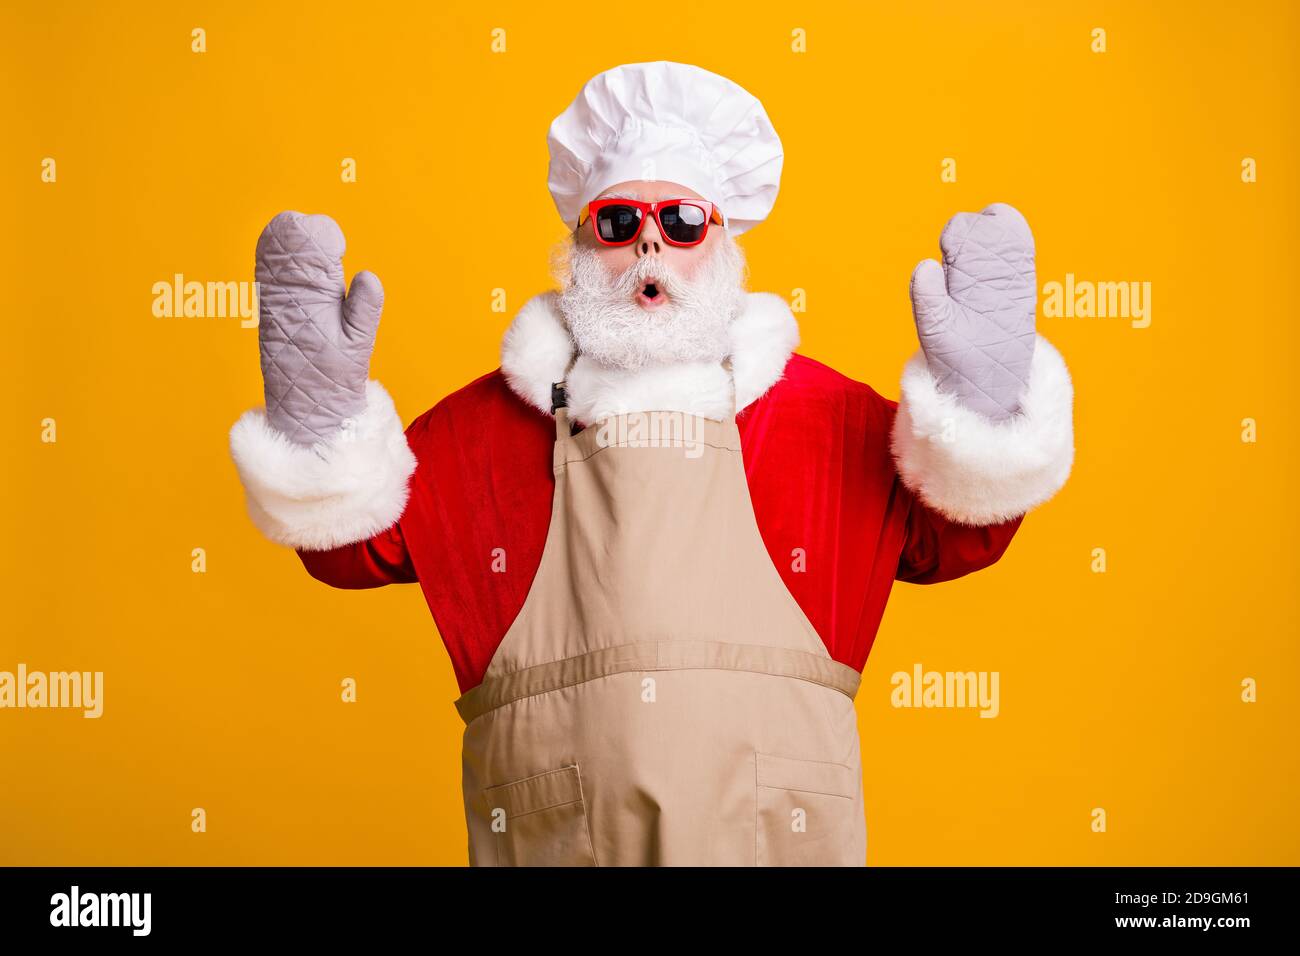 Photo of confused santa grandpa chef headwear bake cookery raise hands gloves open mouth tried help did wrong move wear red costume coat sun specs cap Stock Photo